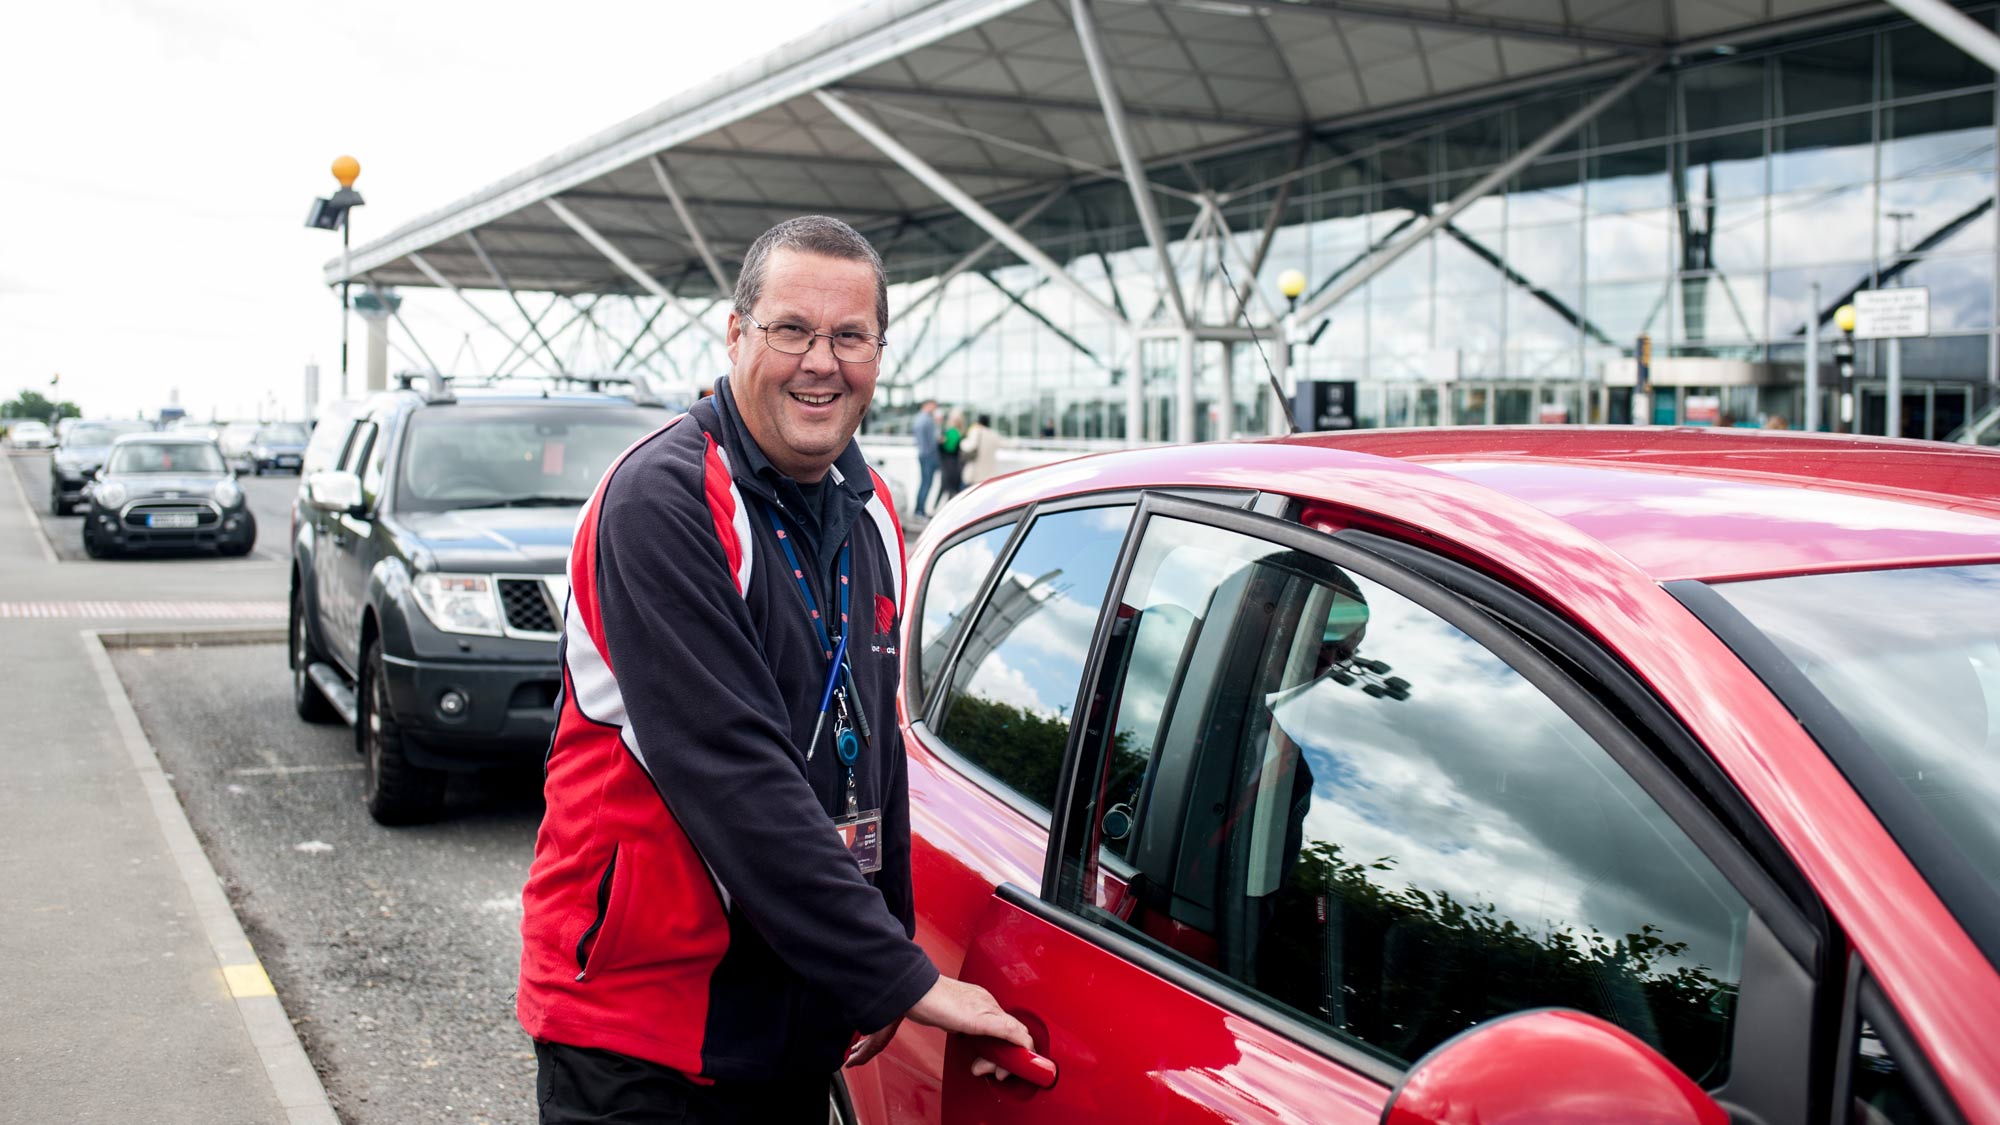 Stansted Airport Meet and Greet | Valet Parking | I Love